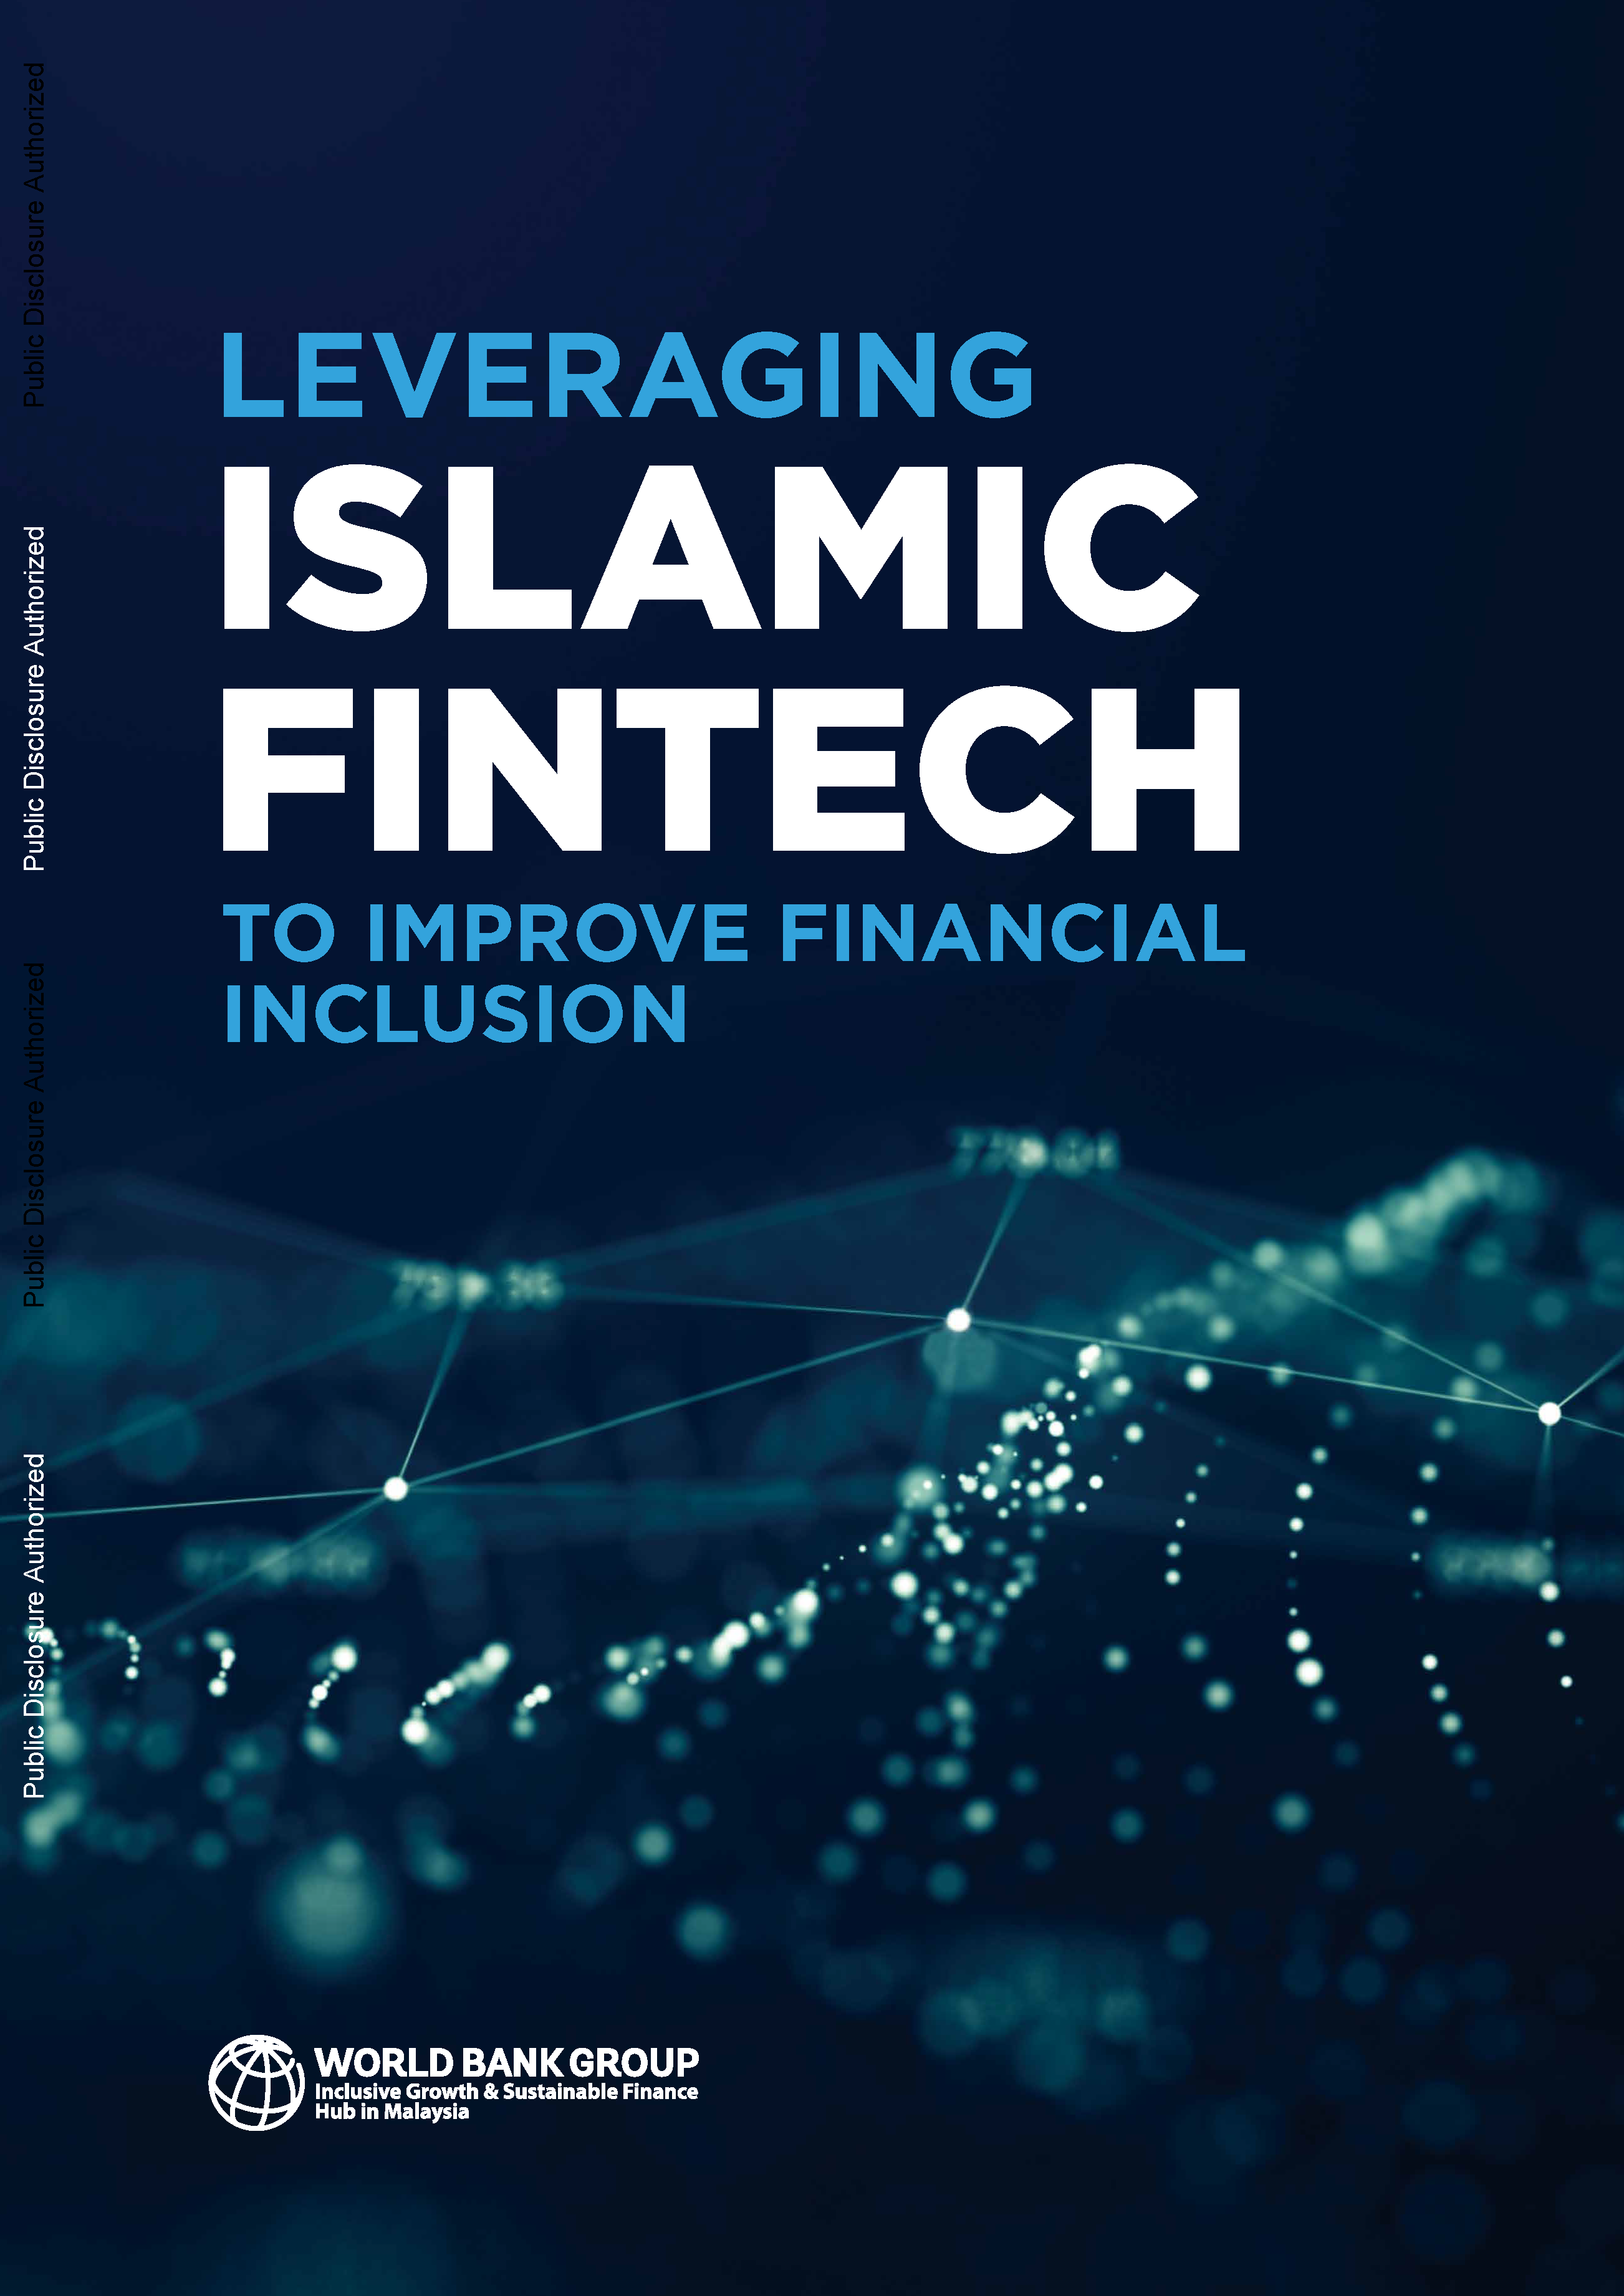 Leveraging Islamic Fintech to Improve Financial Inclusion